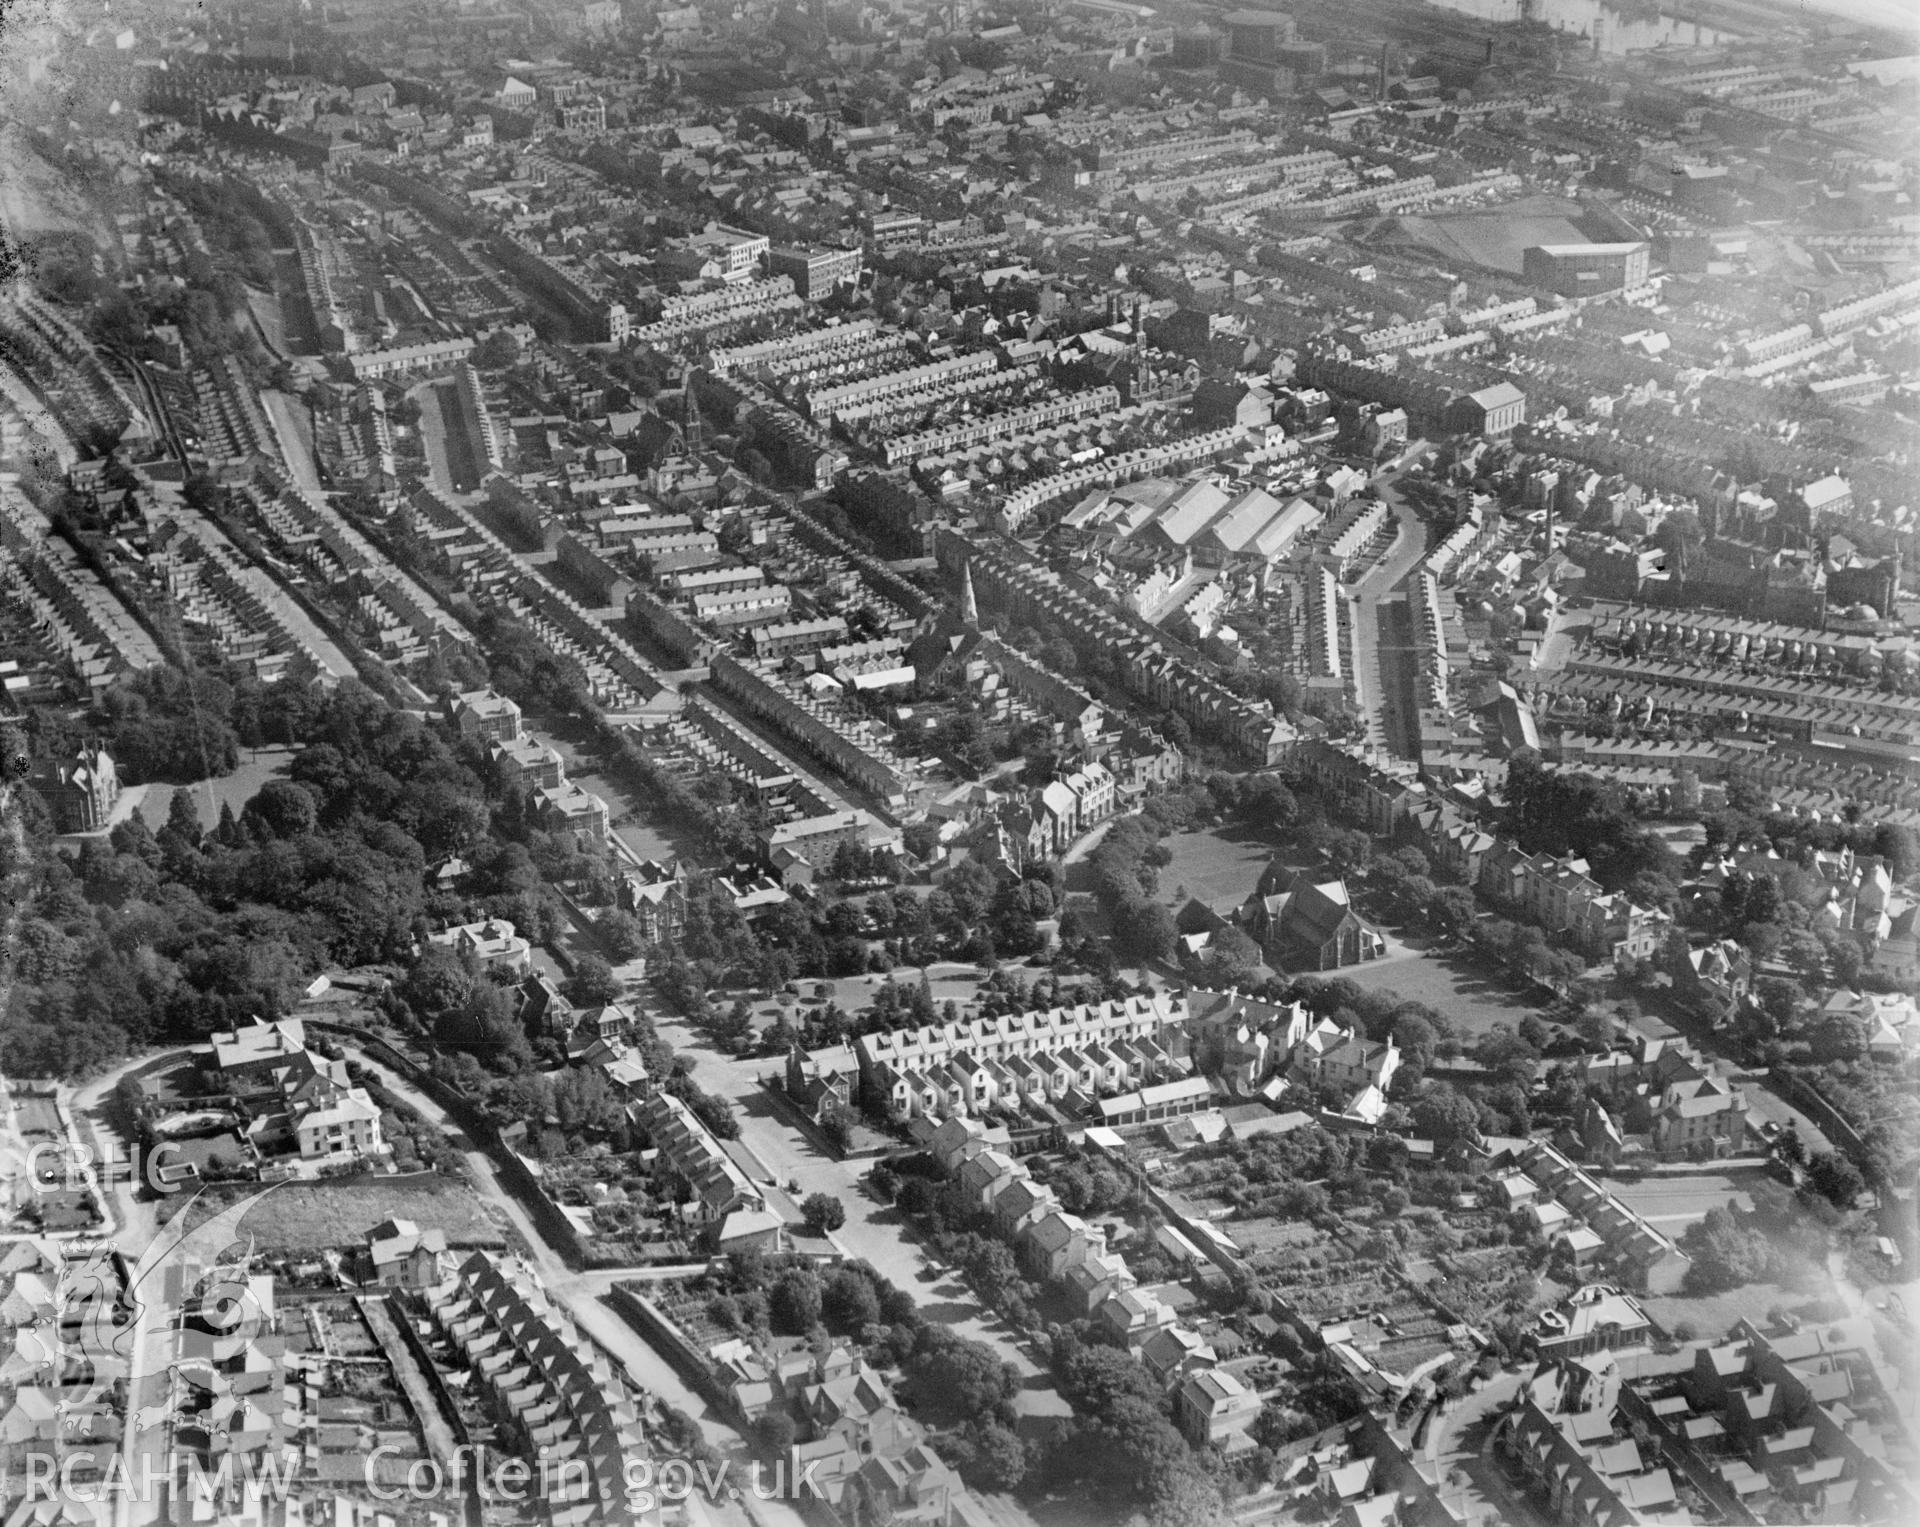 General view of Swansea, residential areas, oblique aerial view. 5?x4? black and white glass plate negative.